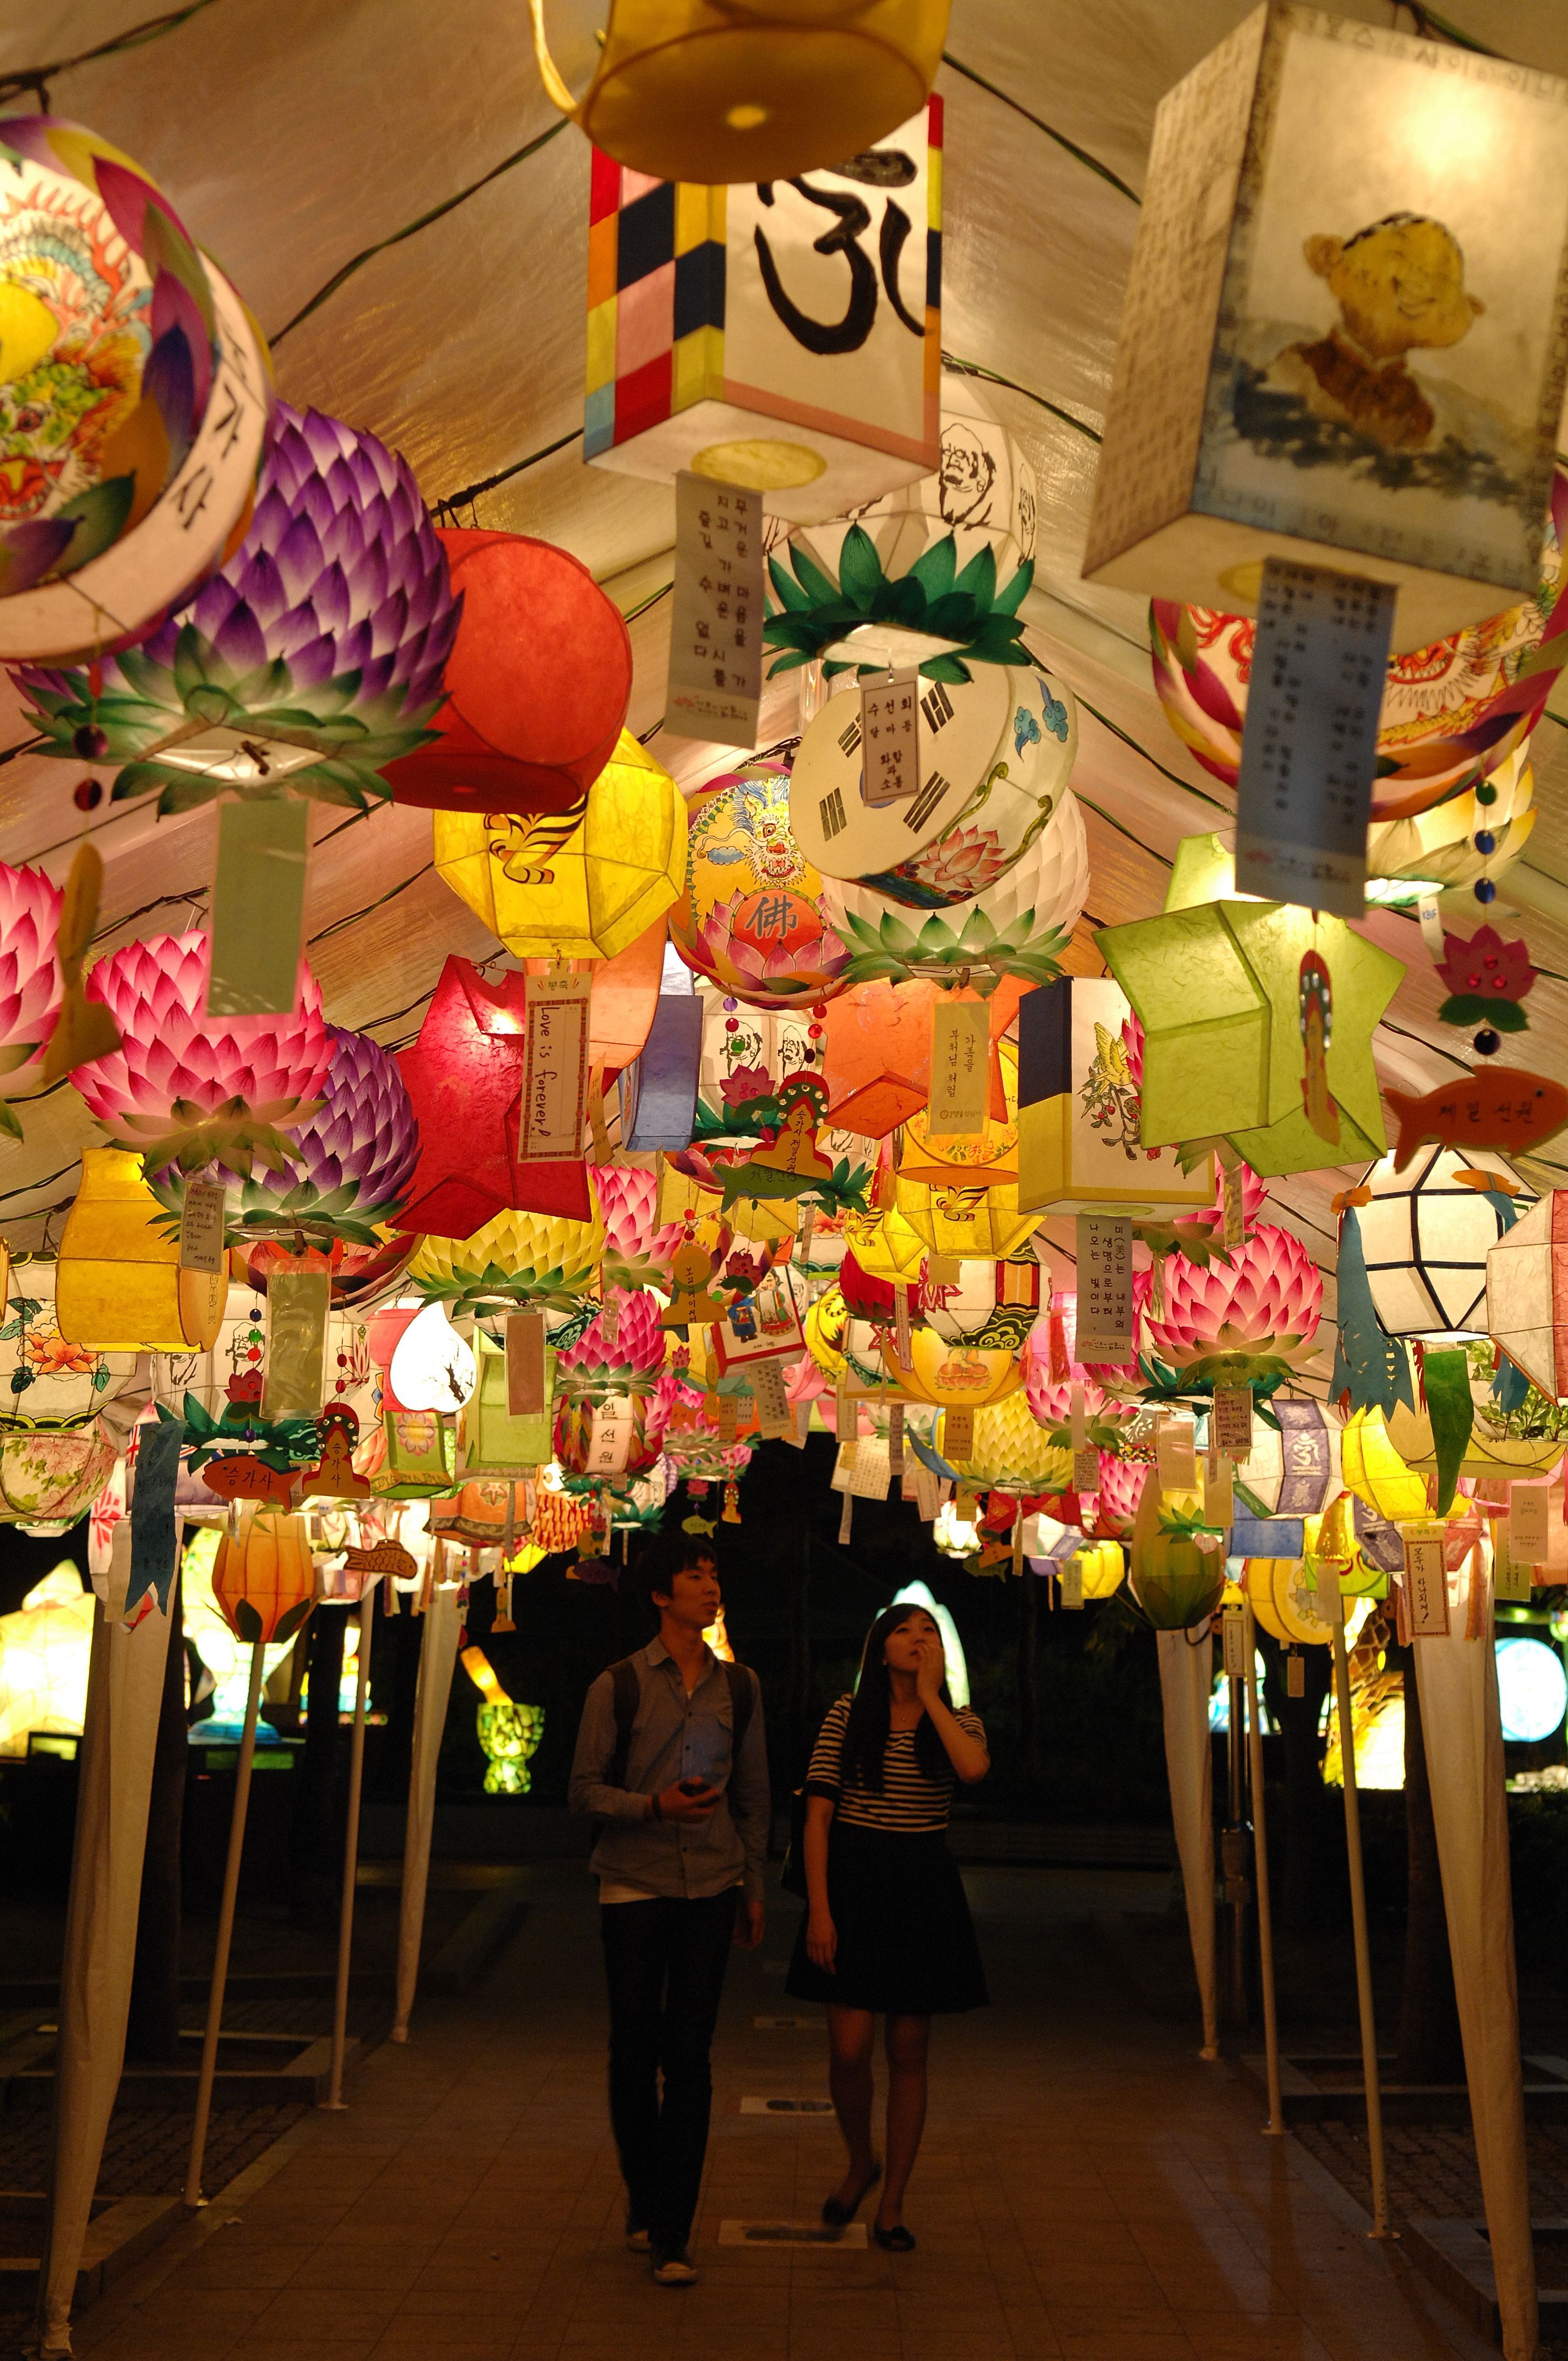 Please come see the meticulously crafted and exquisite lanterns